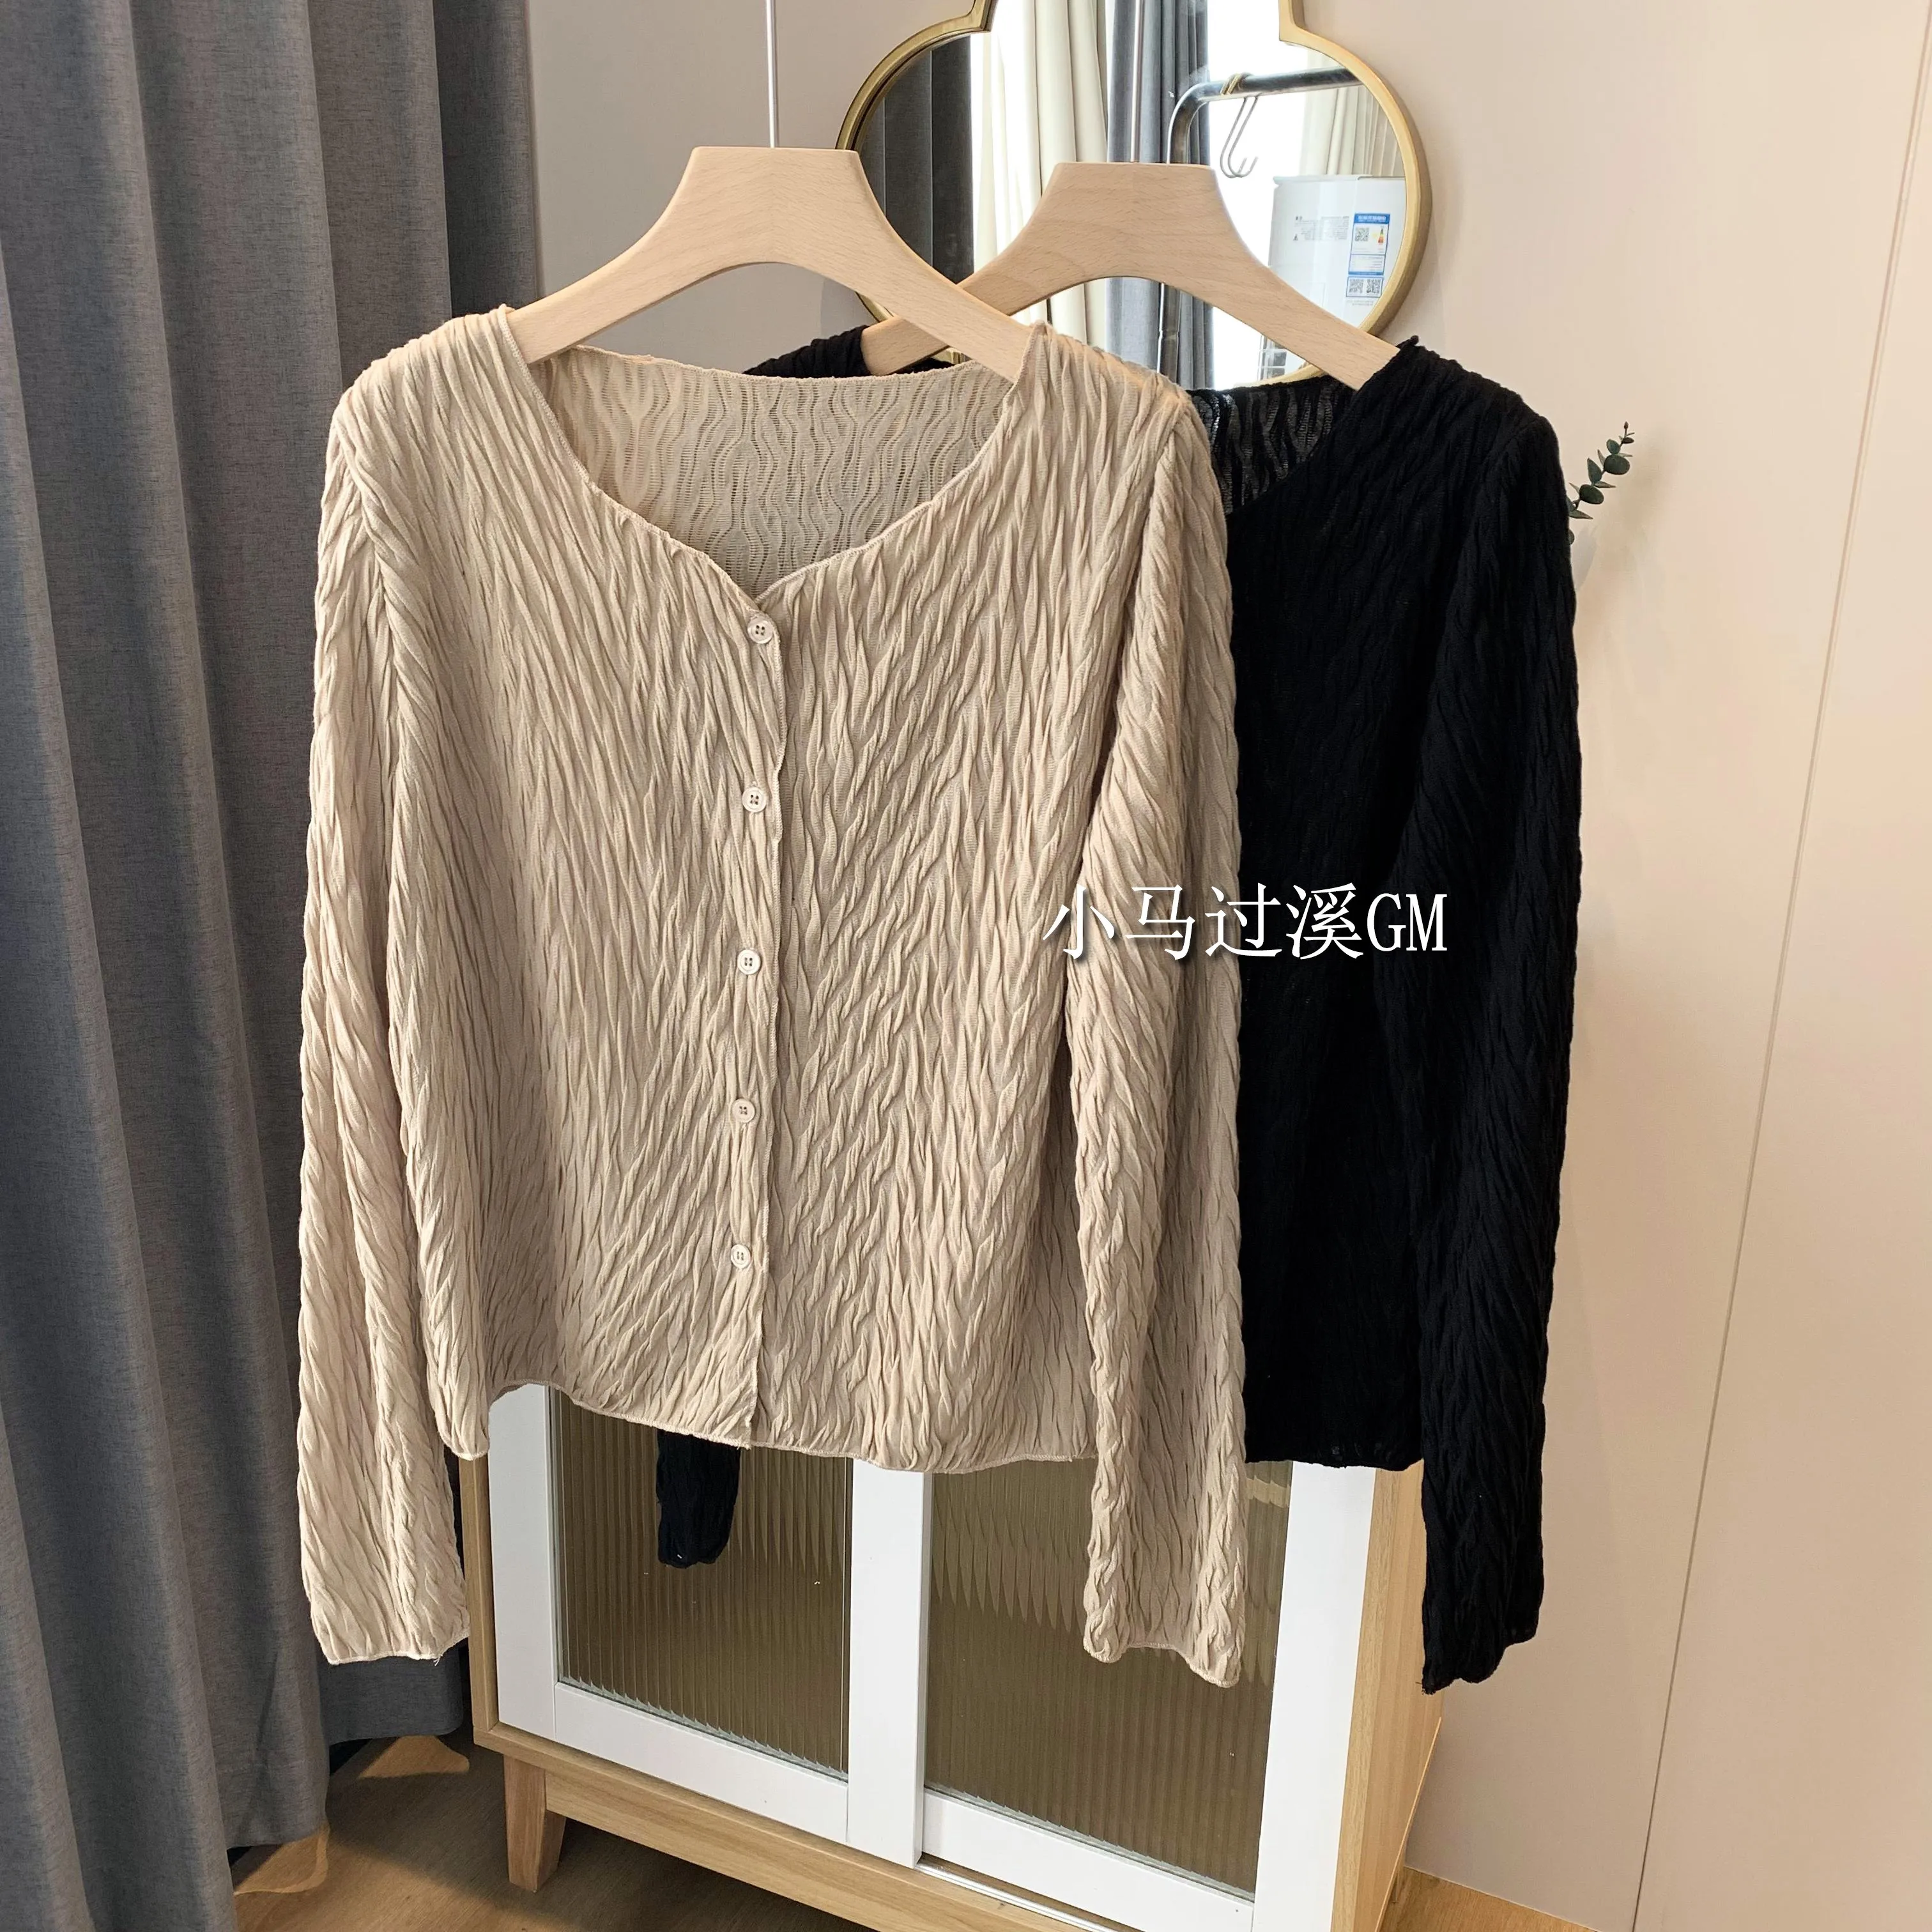 

High Quality Casual Baggy Chic Autumn And Winter Sweater Girls Tshirts Short Folds Tops For Women